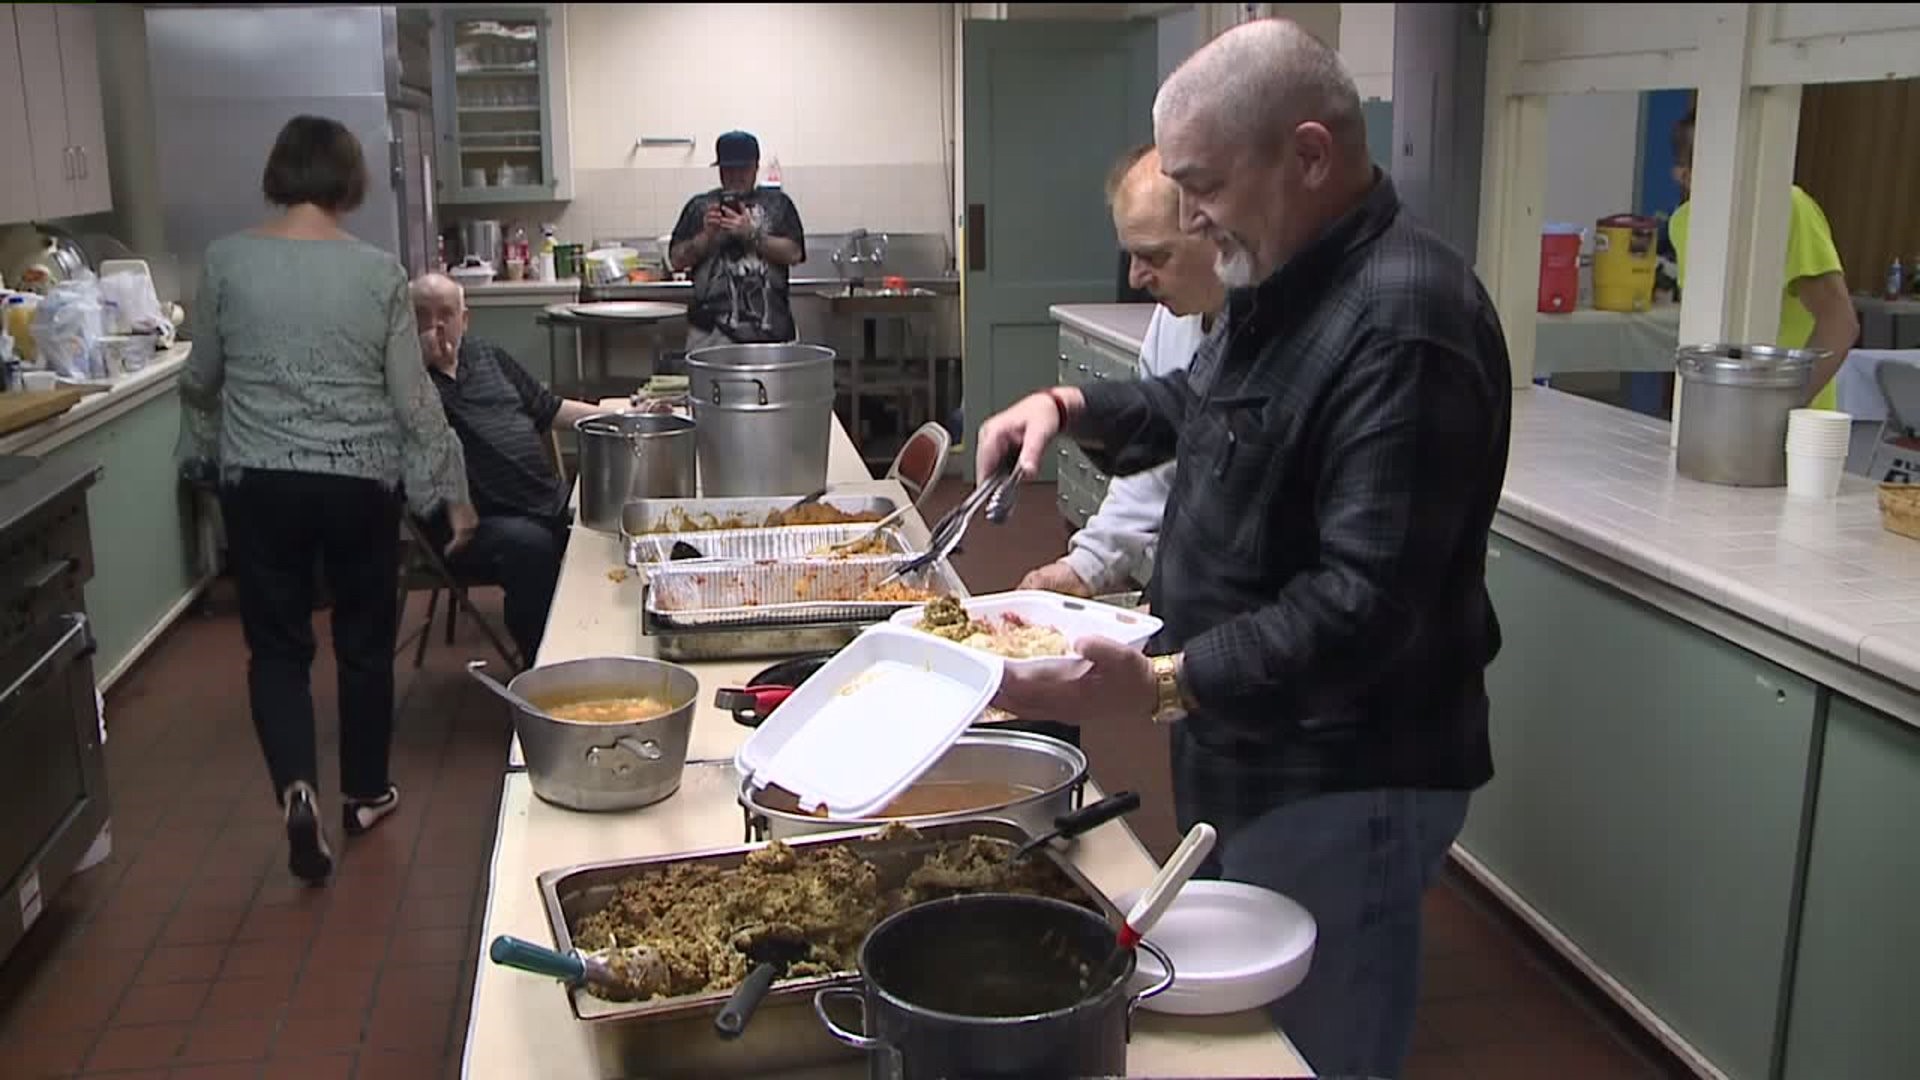 Easter Meal for Less Fortunate in Monroe County